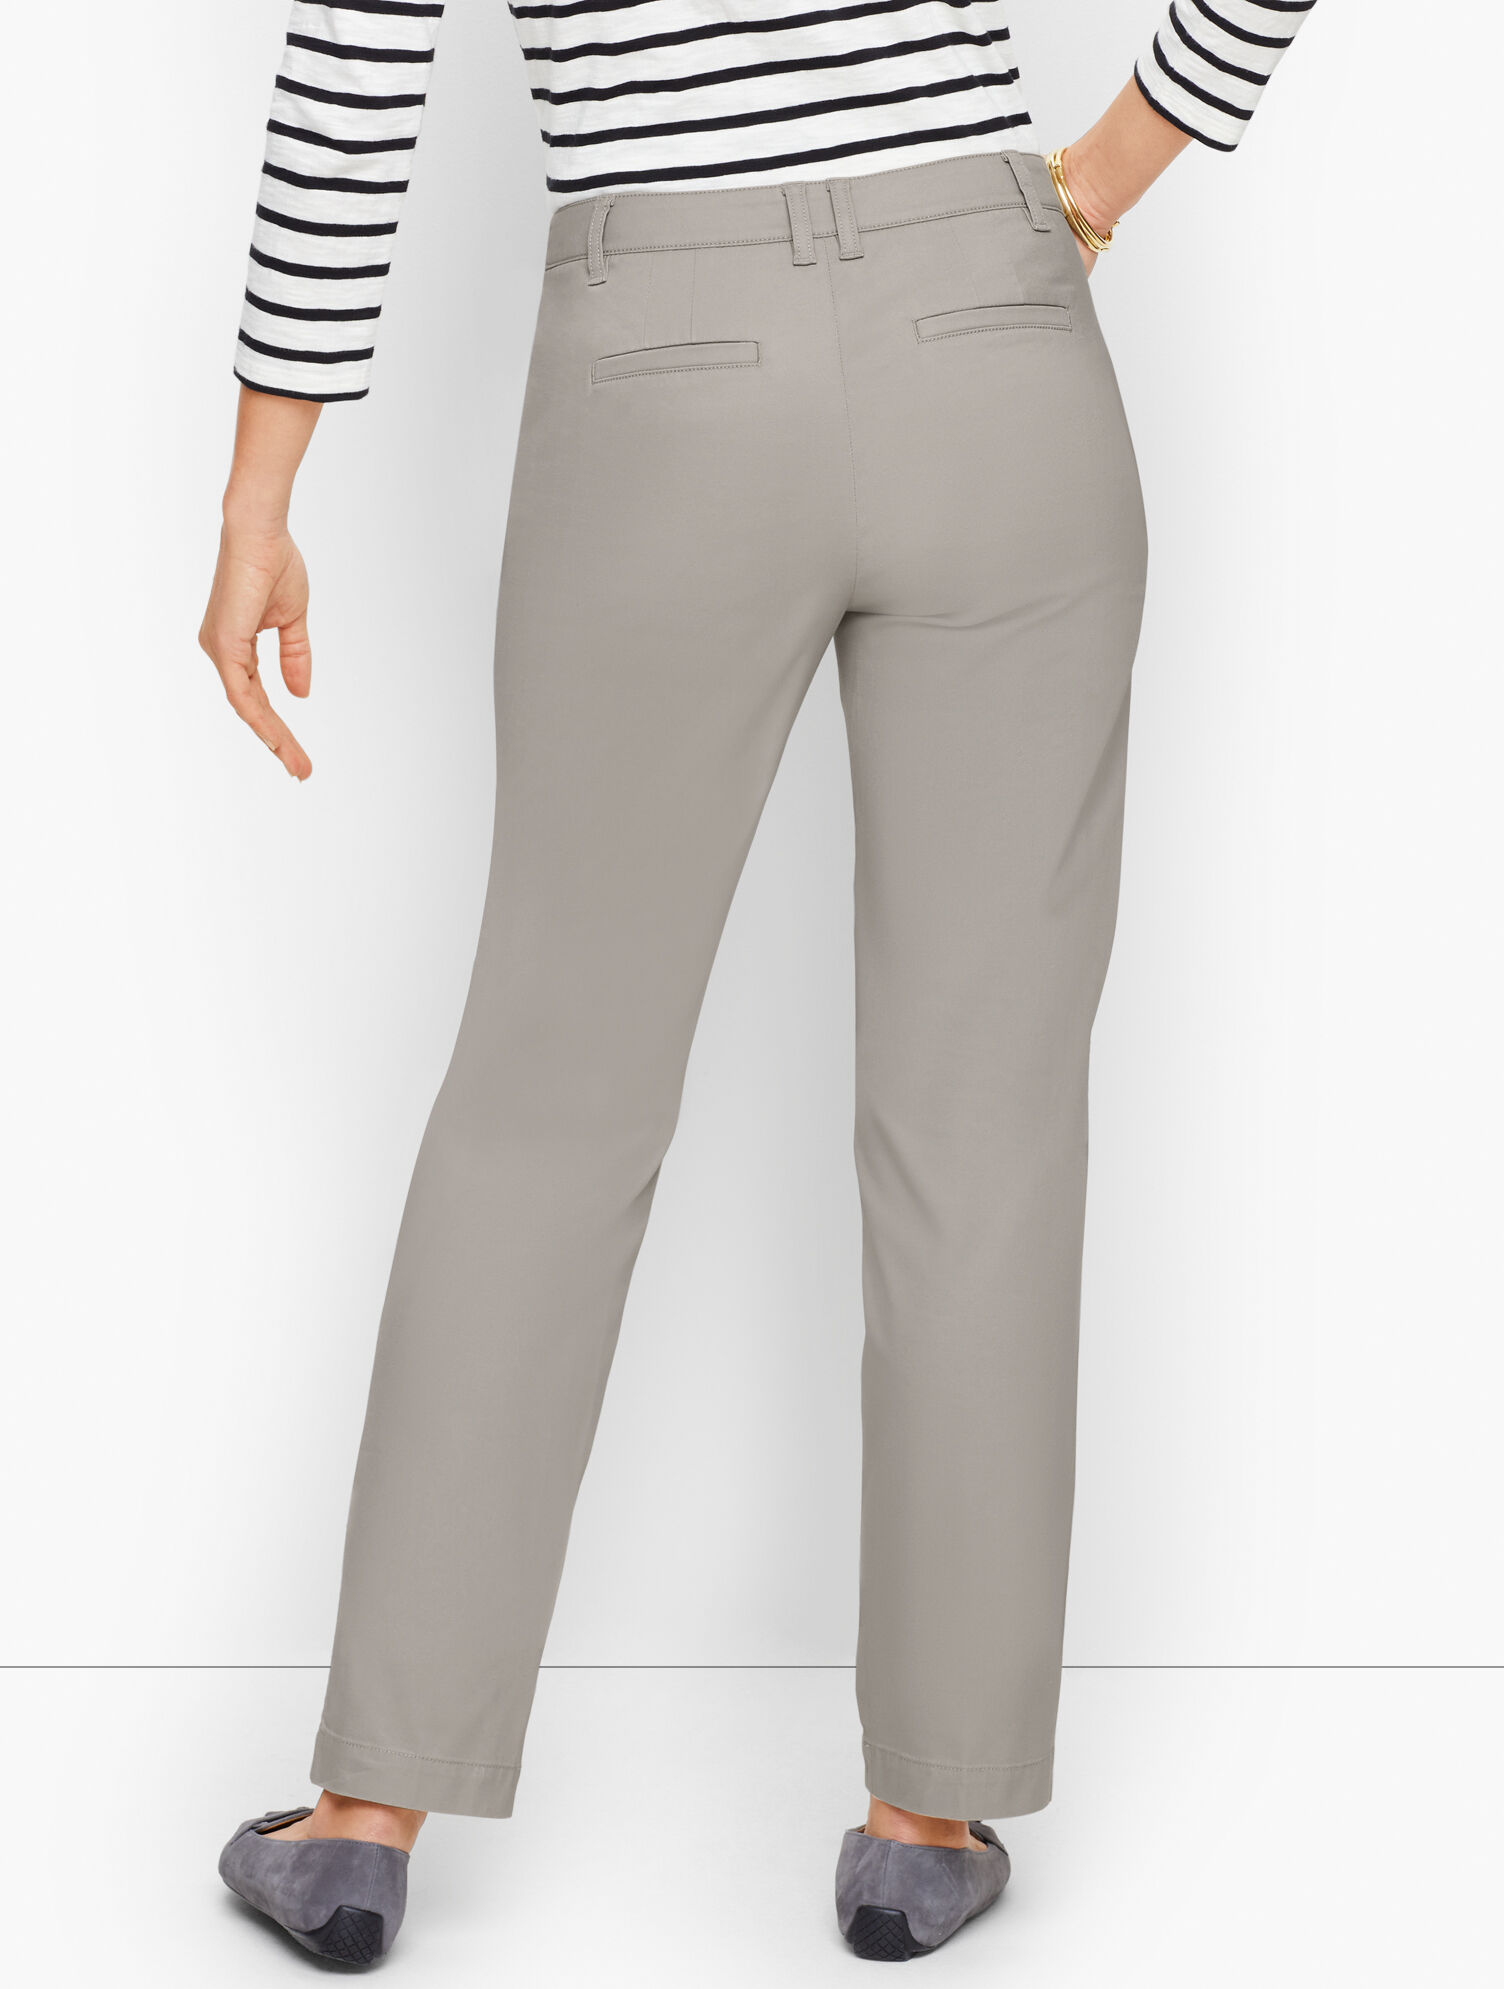 The Perfect Chinos - Curvy Fit